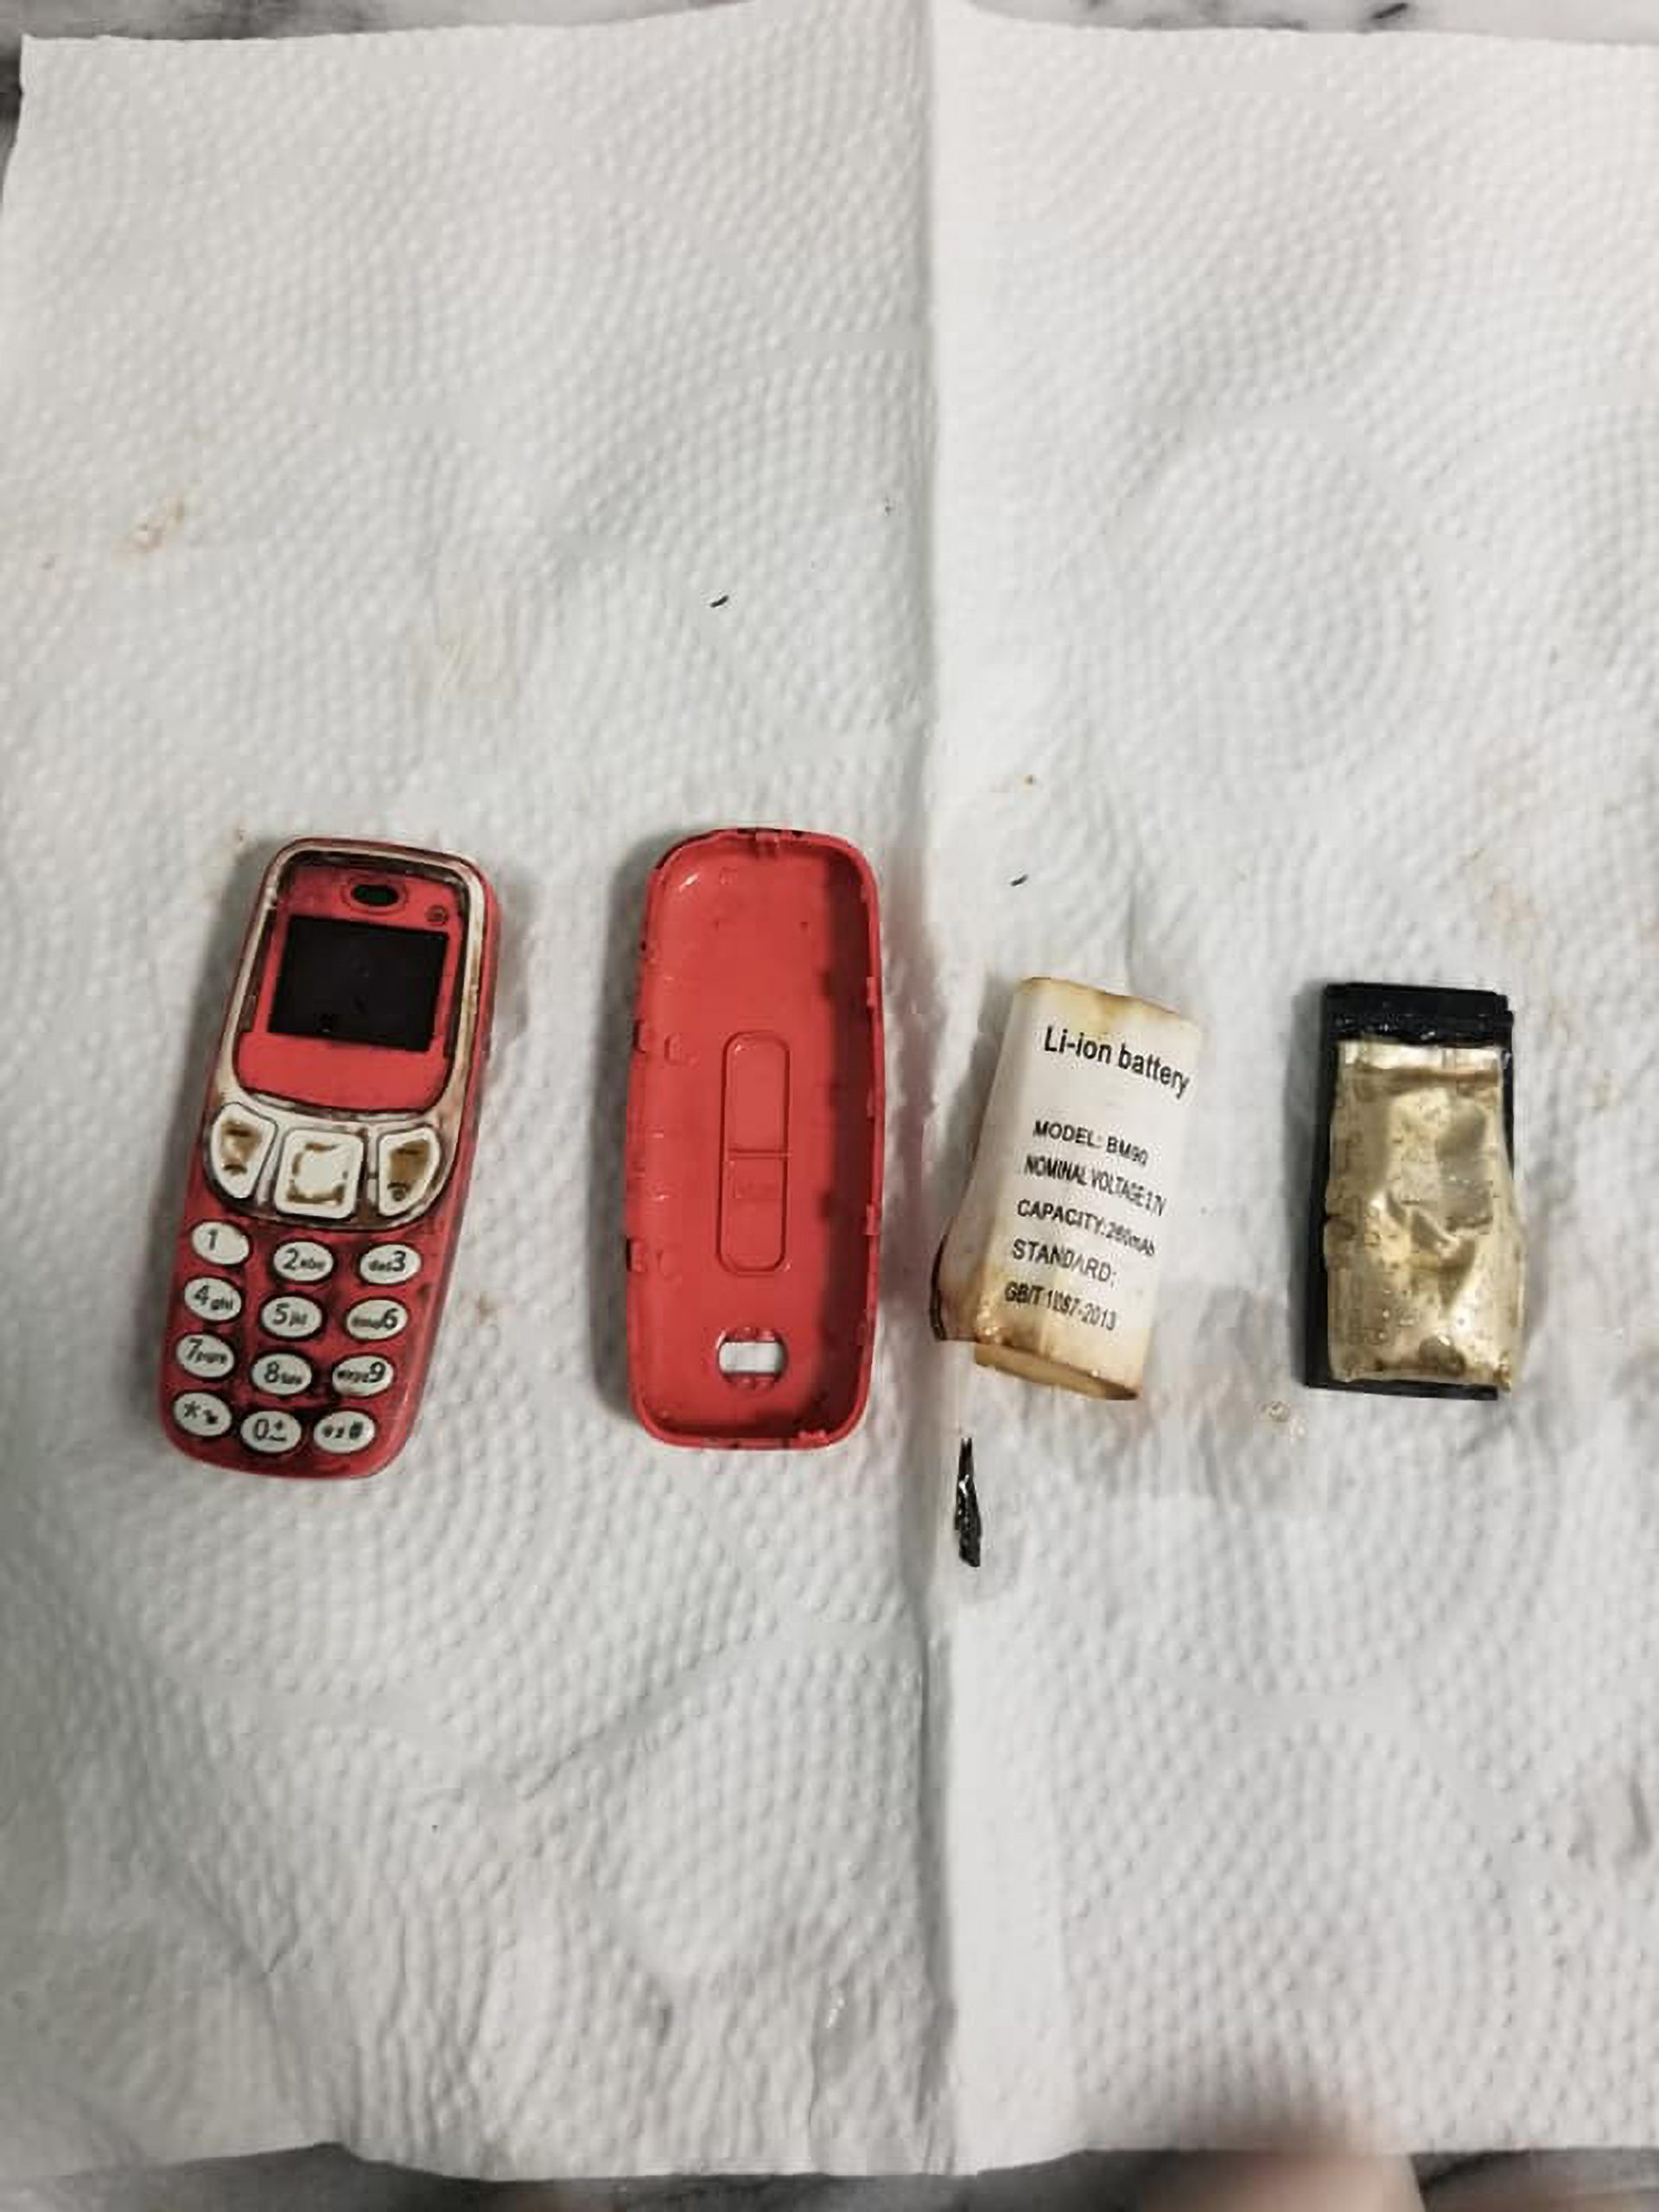 Read more about the article Man Spends 4 Days In Agony After Swallowing Chunky Old Nokia Phone